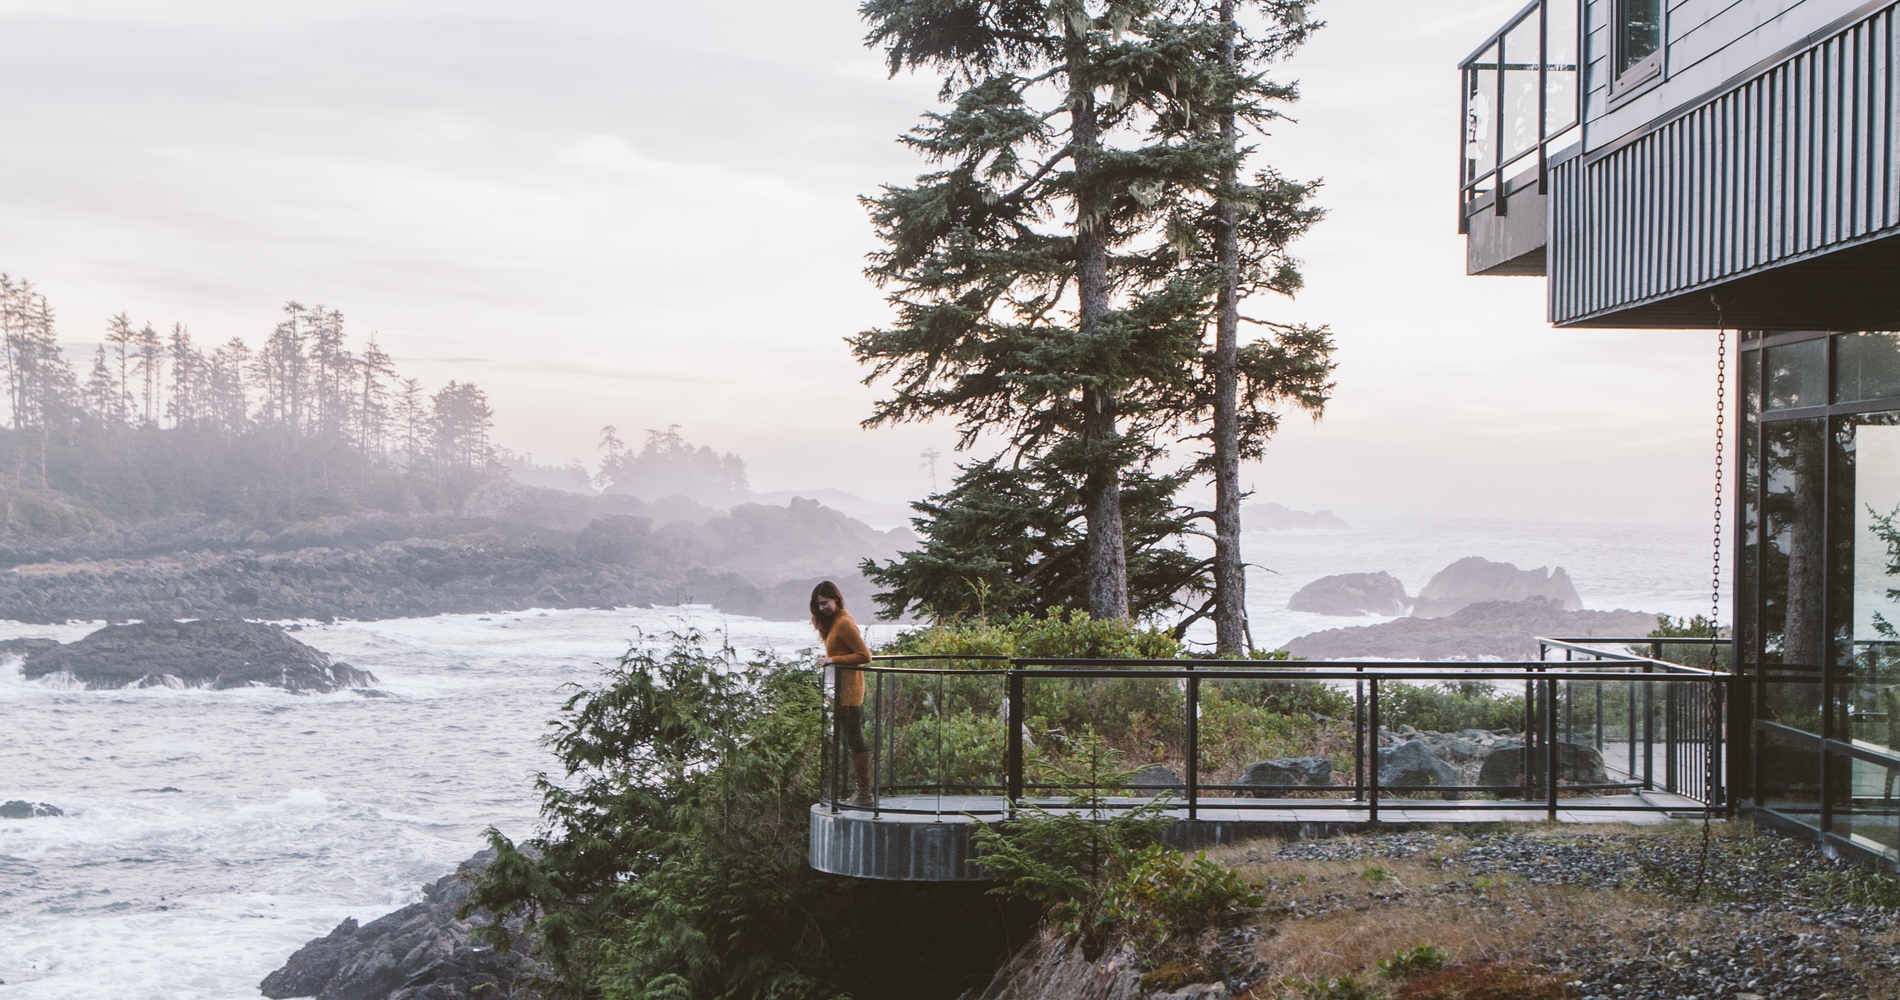 A person stands on the deck of the Black Rock Oceanfront Resort in Ucluelet